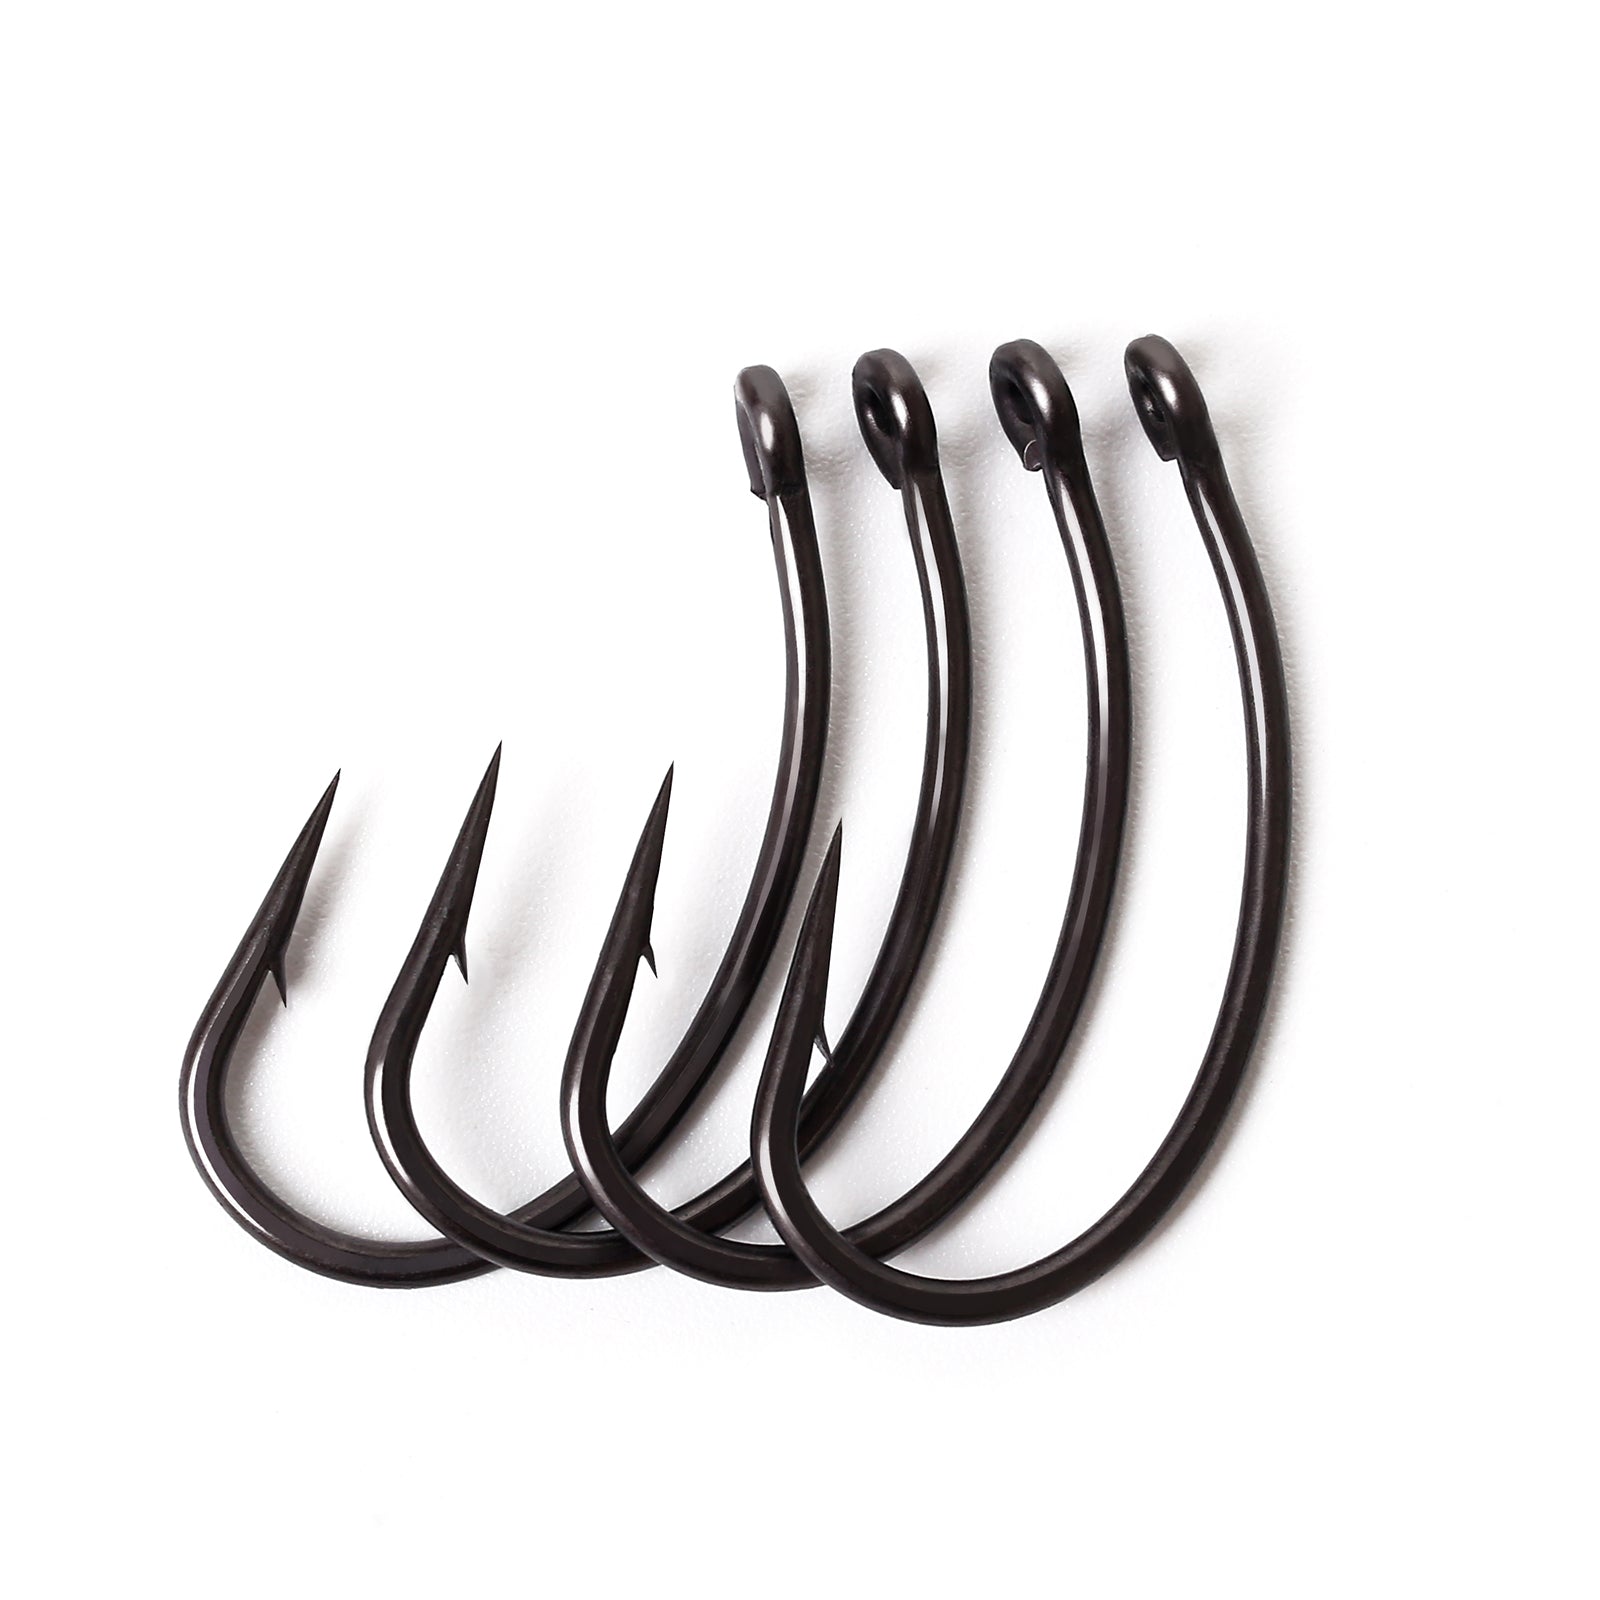 Luroad 50pcs Barbless Carp Coarse Eyed Fishing Hook Size 2, 4, 6, 8, 10,  Available in Teflon Coated Curved Shank Hook and Wide Gape Hook for  Freshwater Saltwater (Hook size 2, Wide